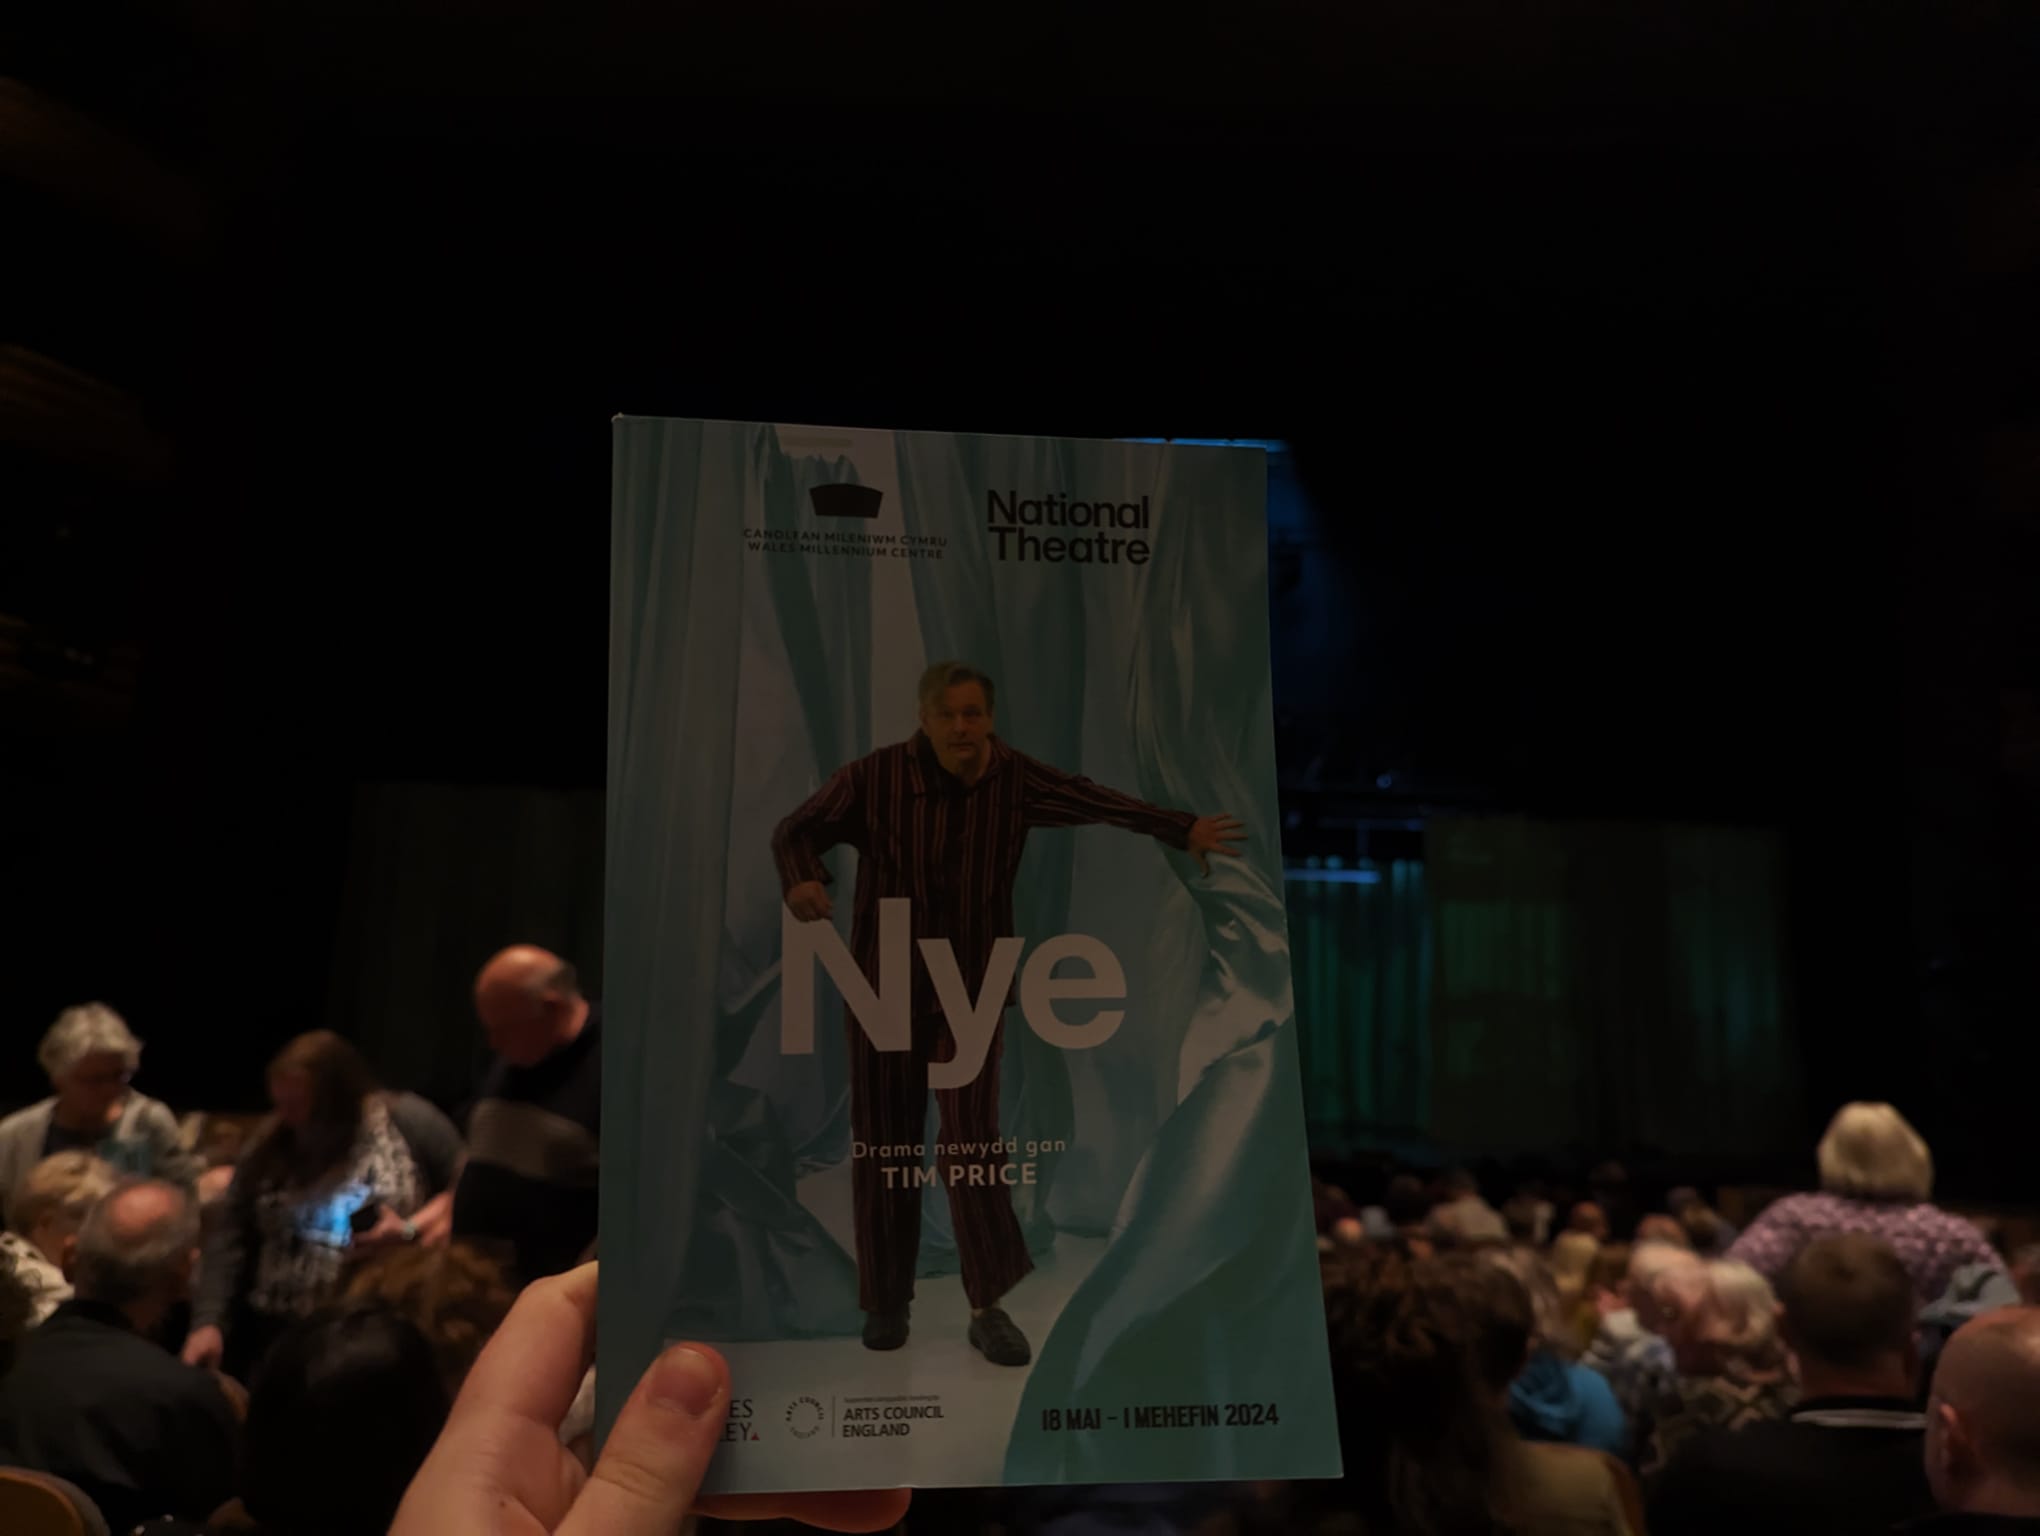 A playbook for Nye by Tim Price